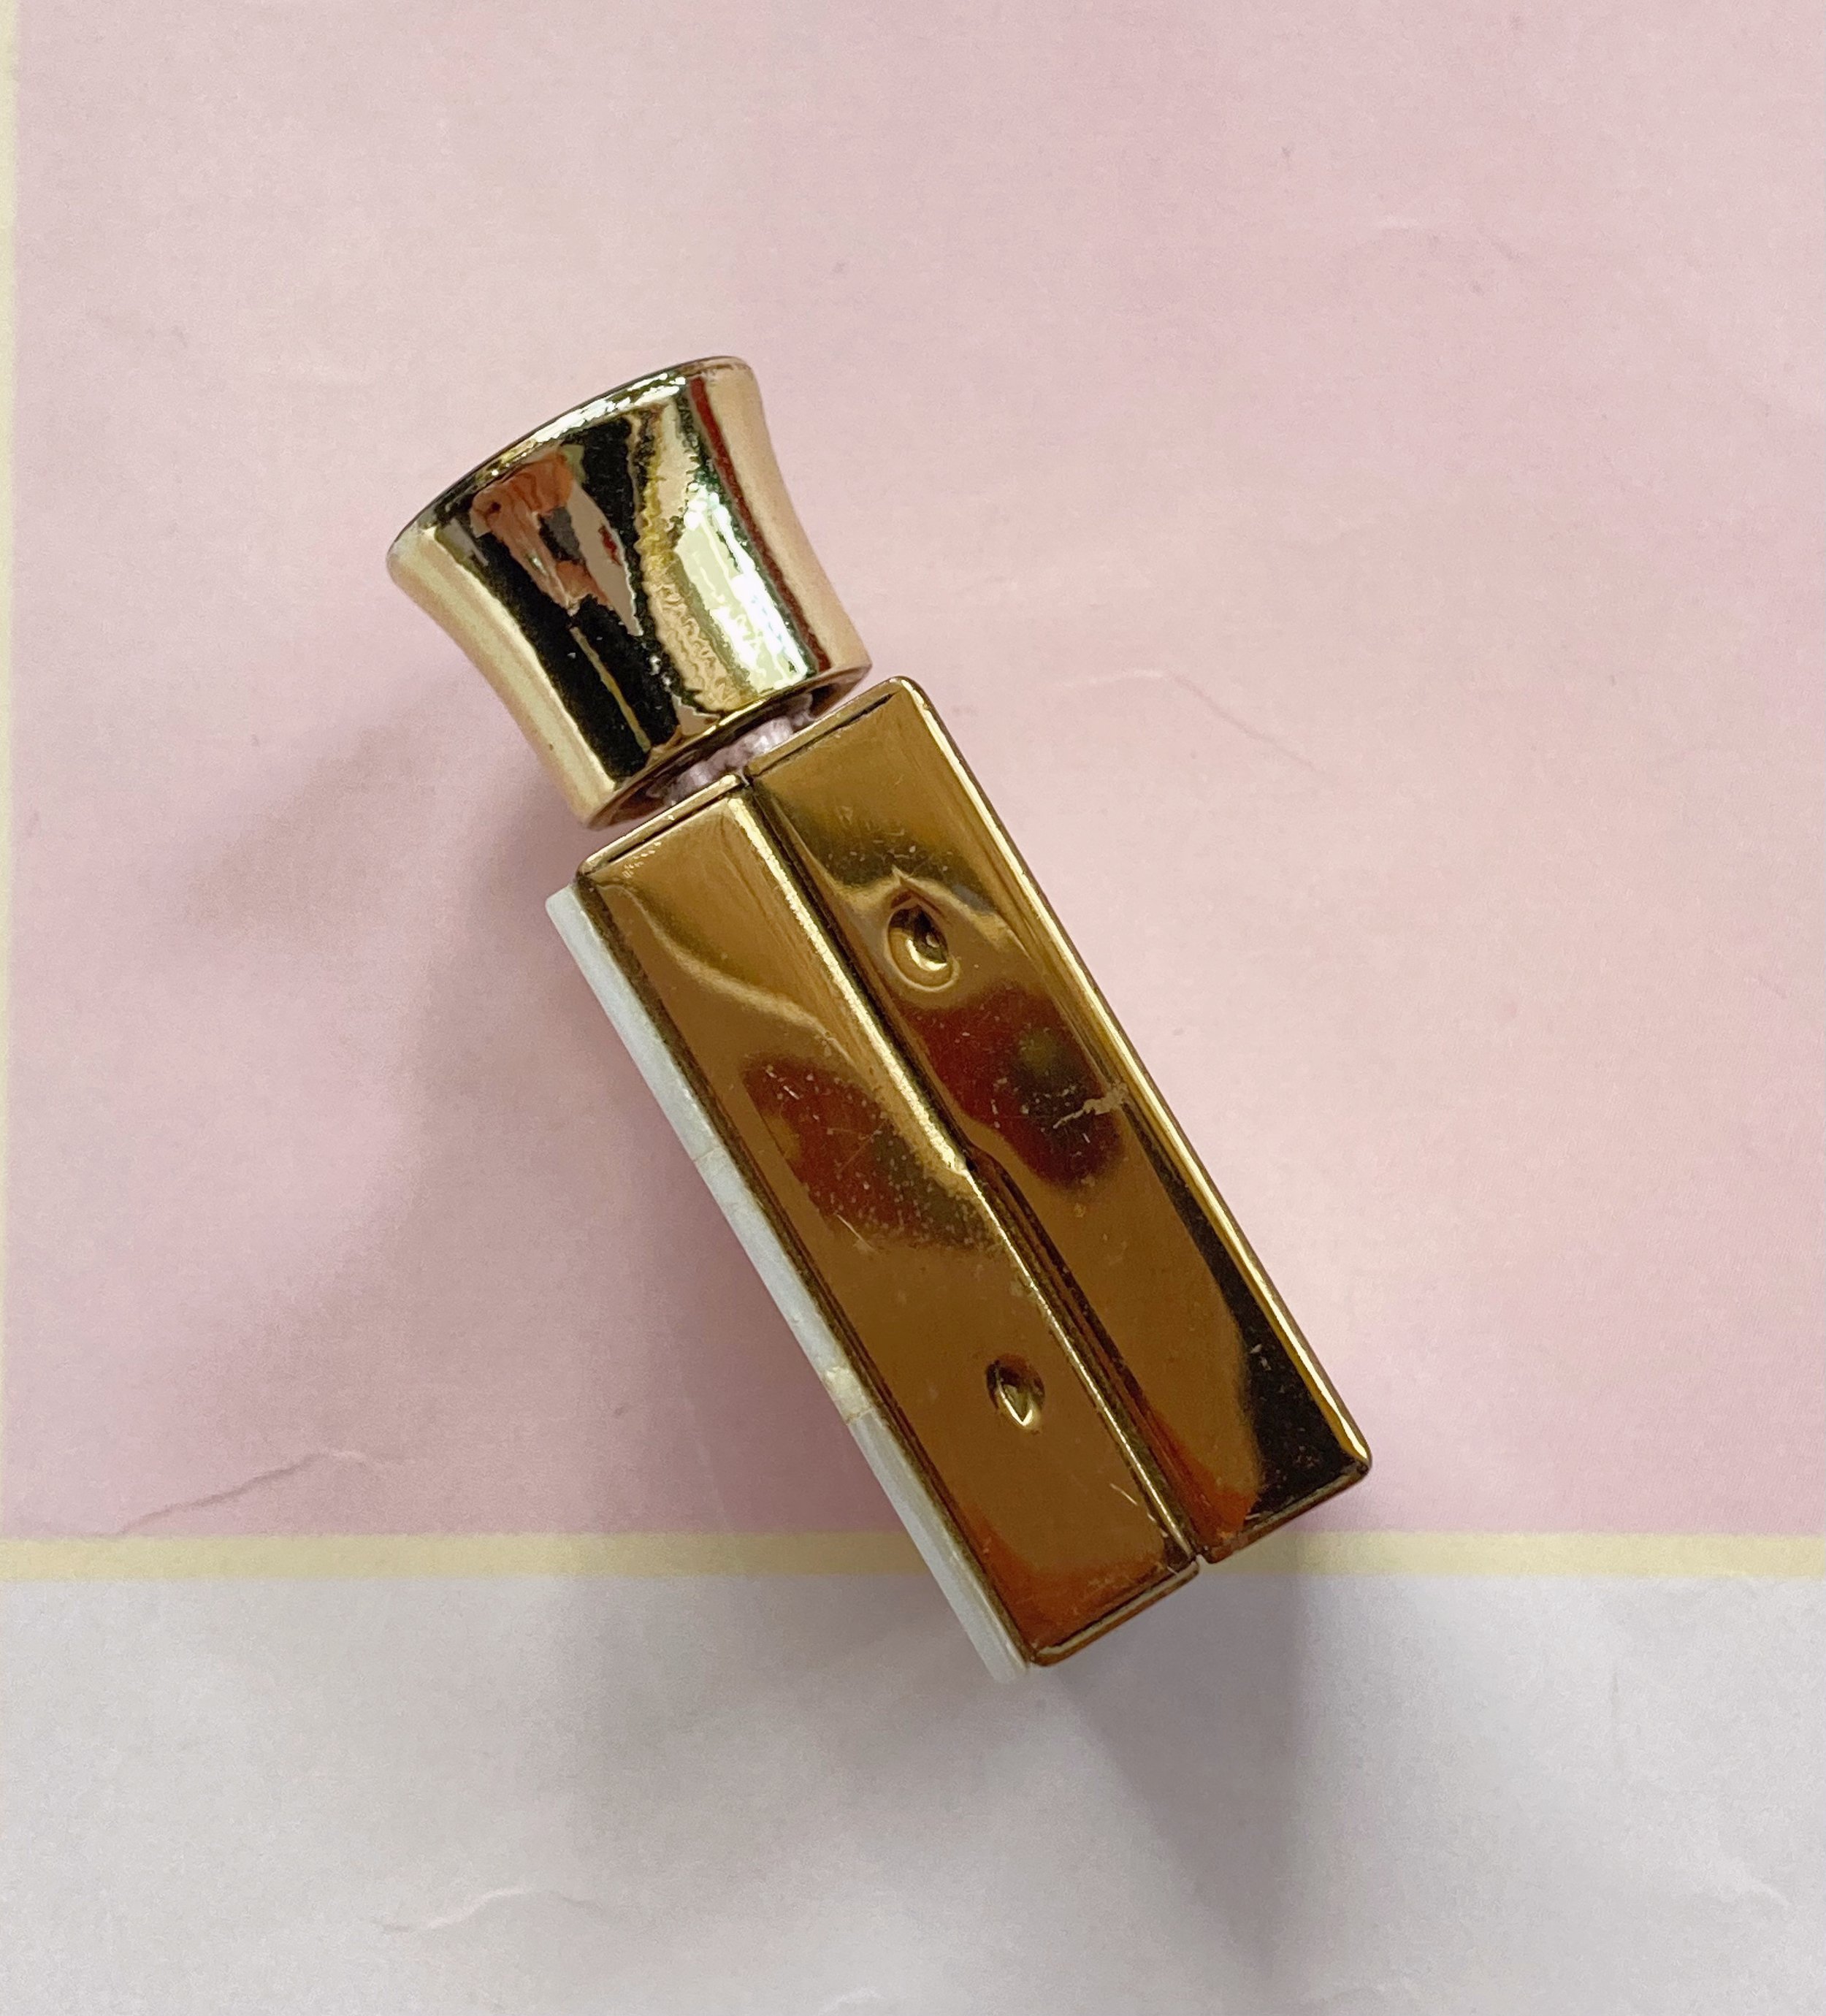 MOTHER OF PEARL 1950's Gold Tone Floral Painted Mini Perfume